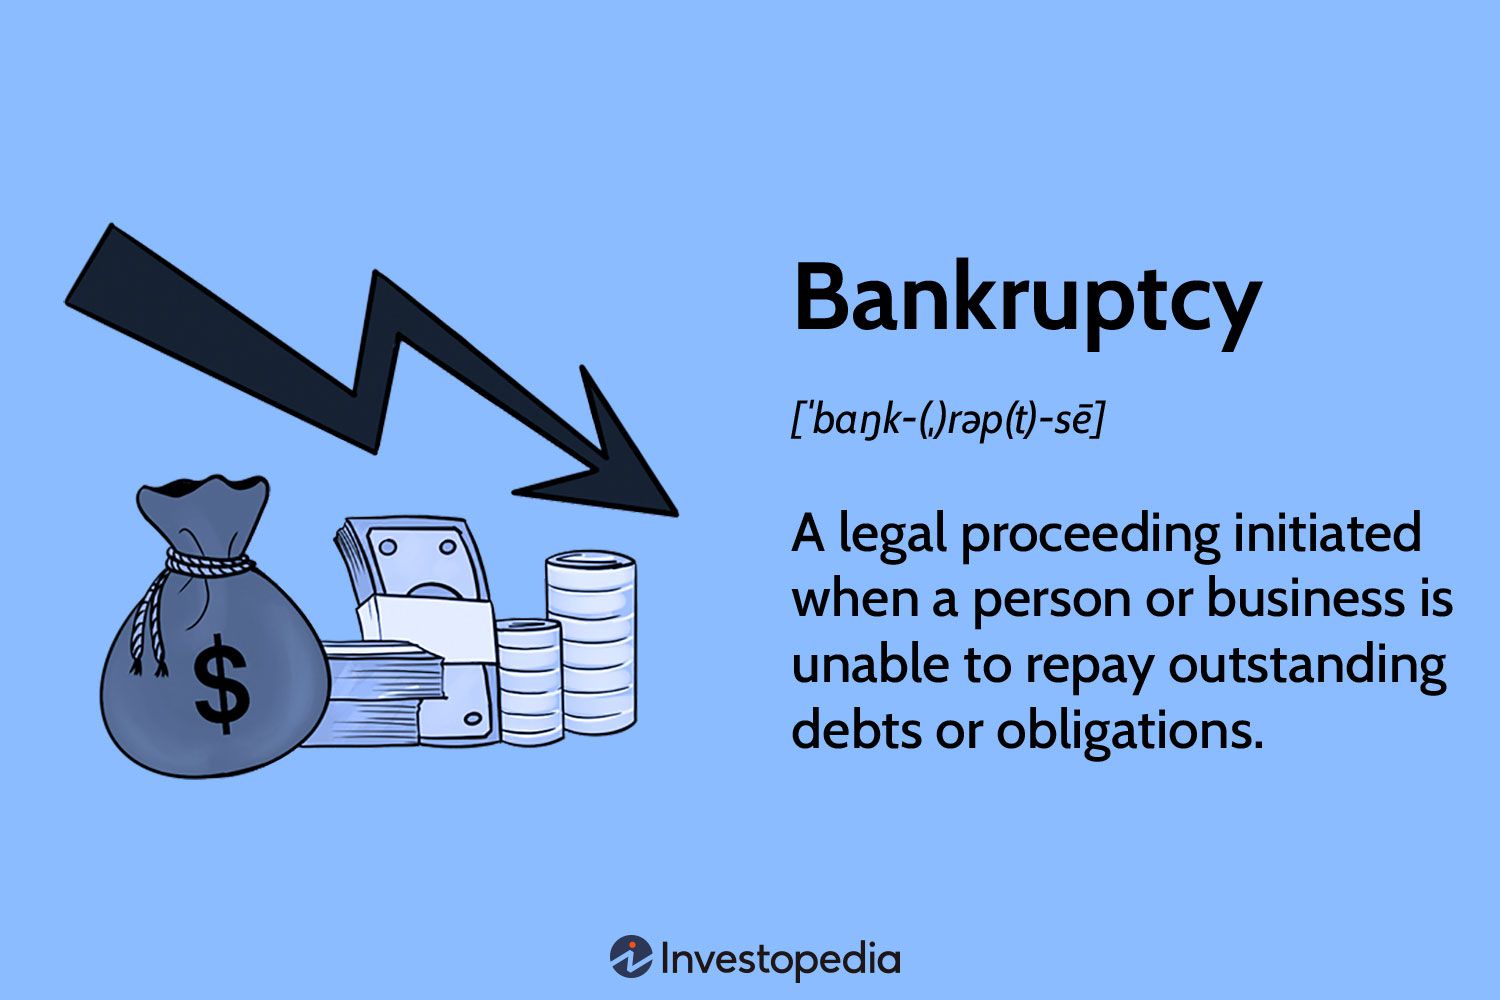 Is Bankruptcy Really Release Choice Acquired?